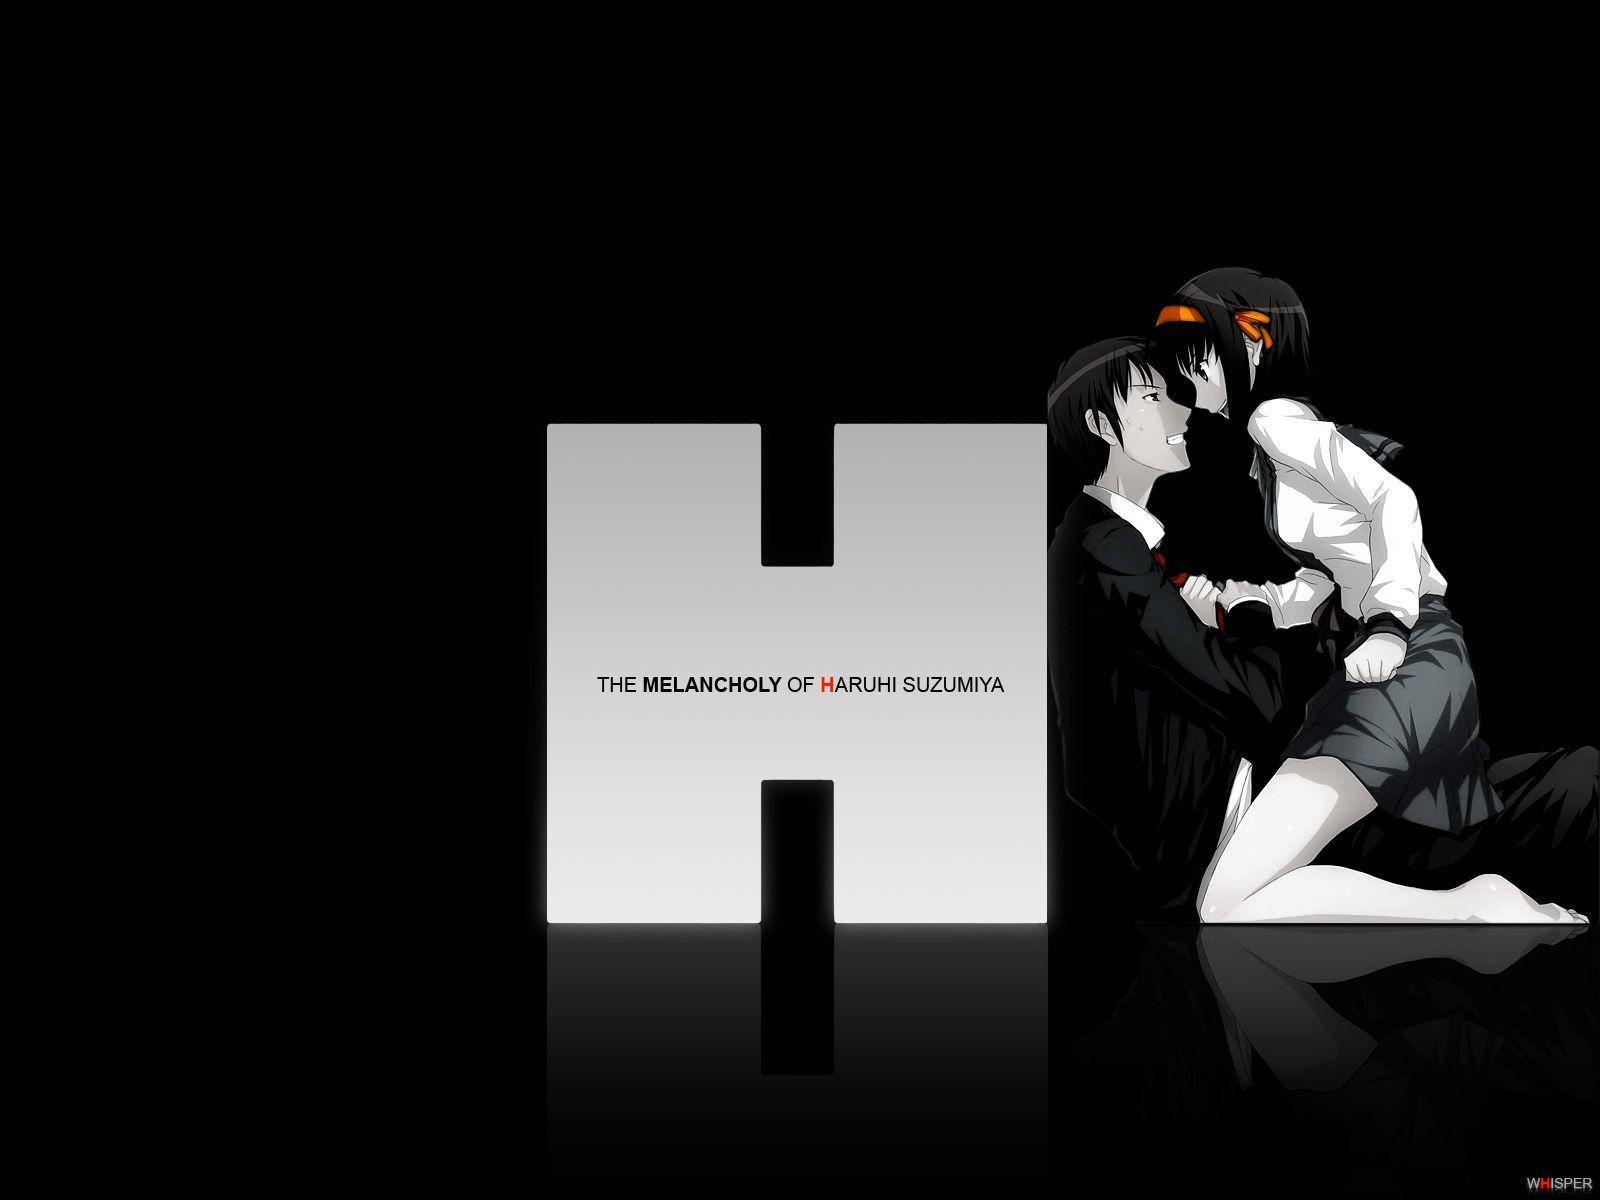 The Image of Haruhi Suzumiya Requests for wallpaper, screen caps